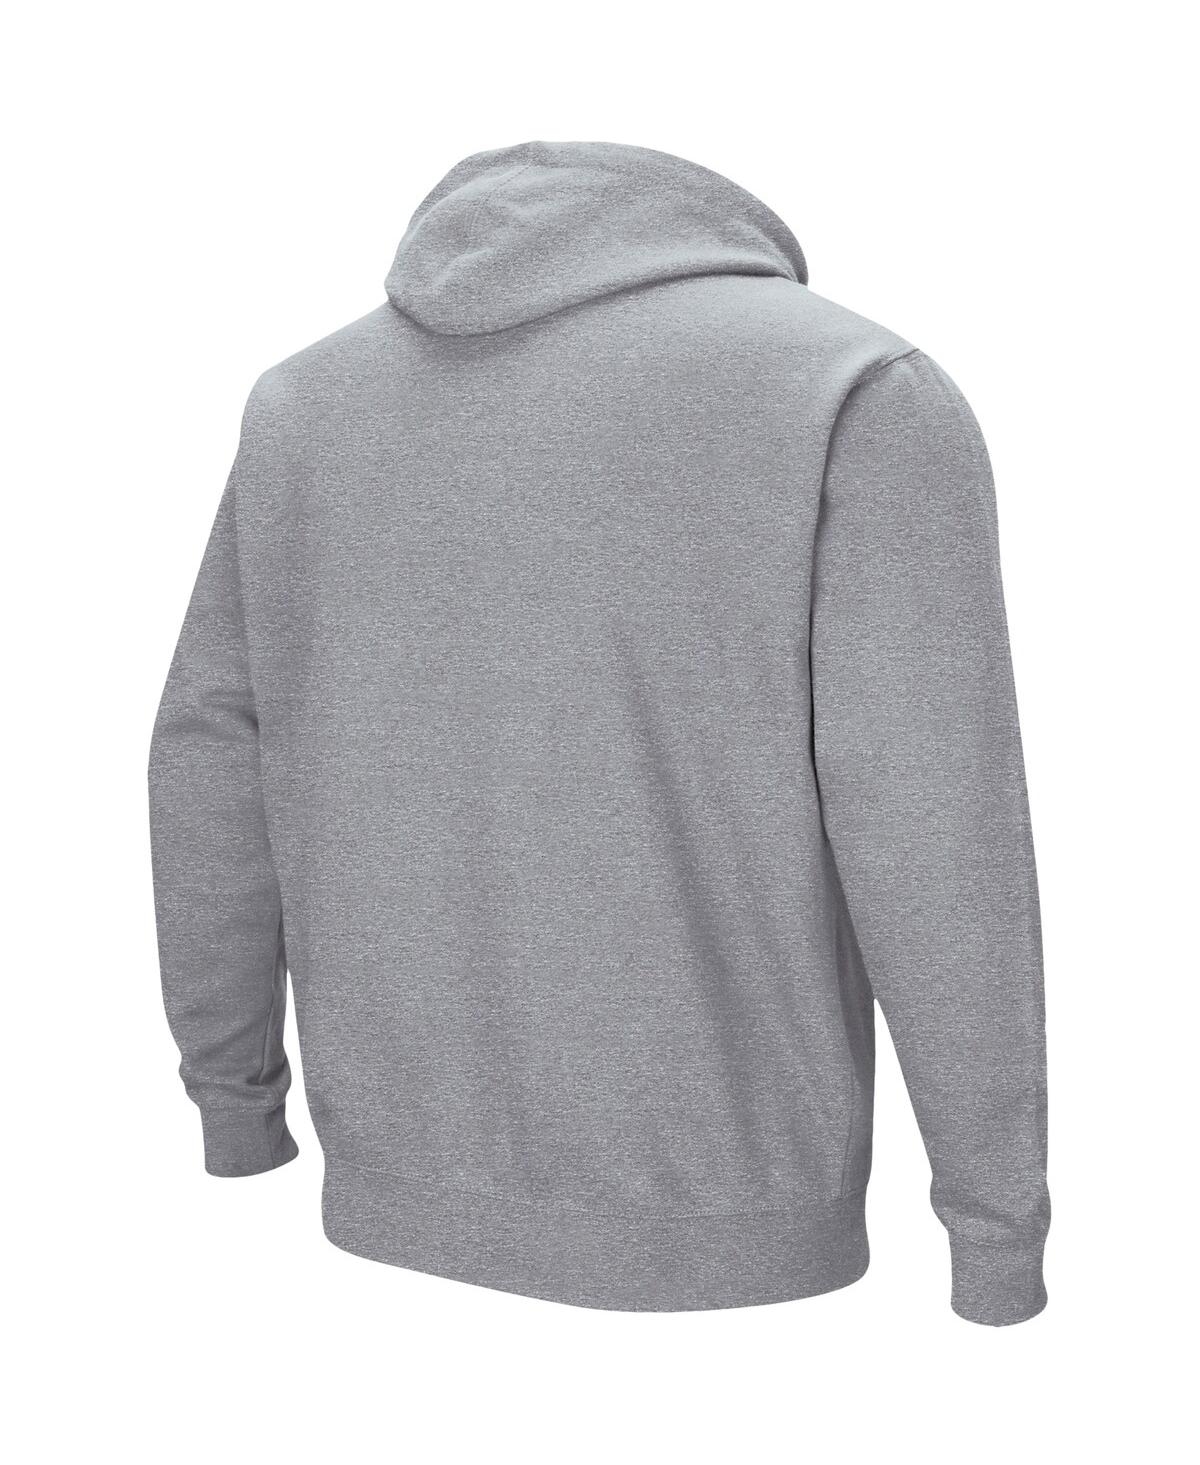 Shop Colosseum Men's  Heathered Gray Johns Hopkins Blue Jays Arch And Logo Pullover Hoodie